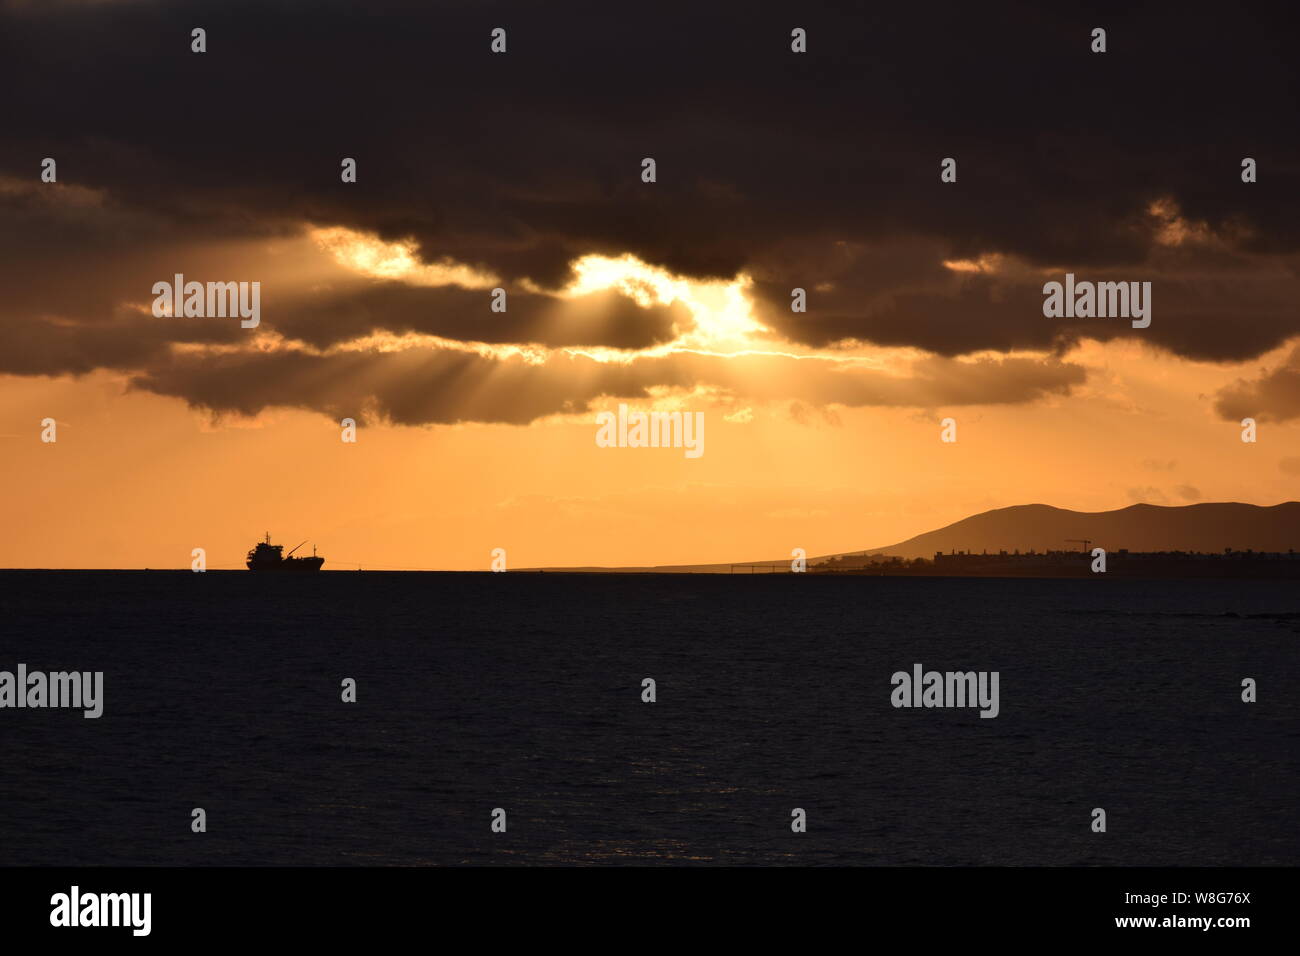 Ship silhouetted on the horizon at sunset with dramatic skies, Arrecife, Lanzarote Stock Photo